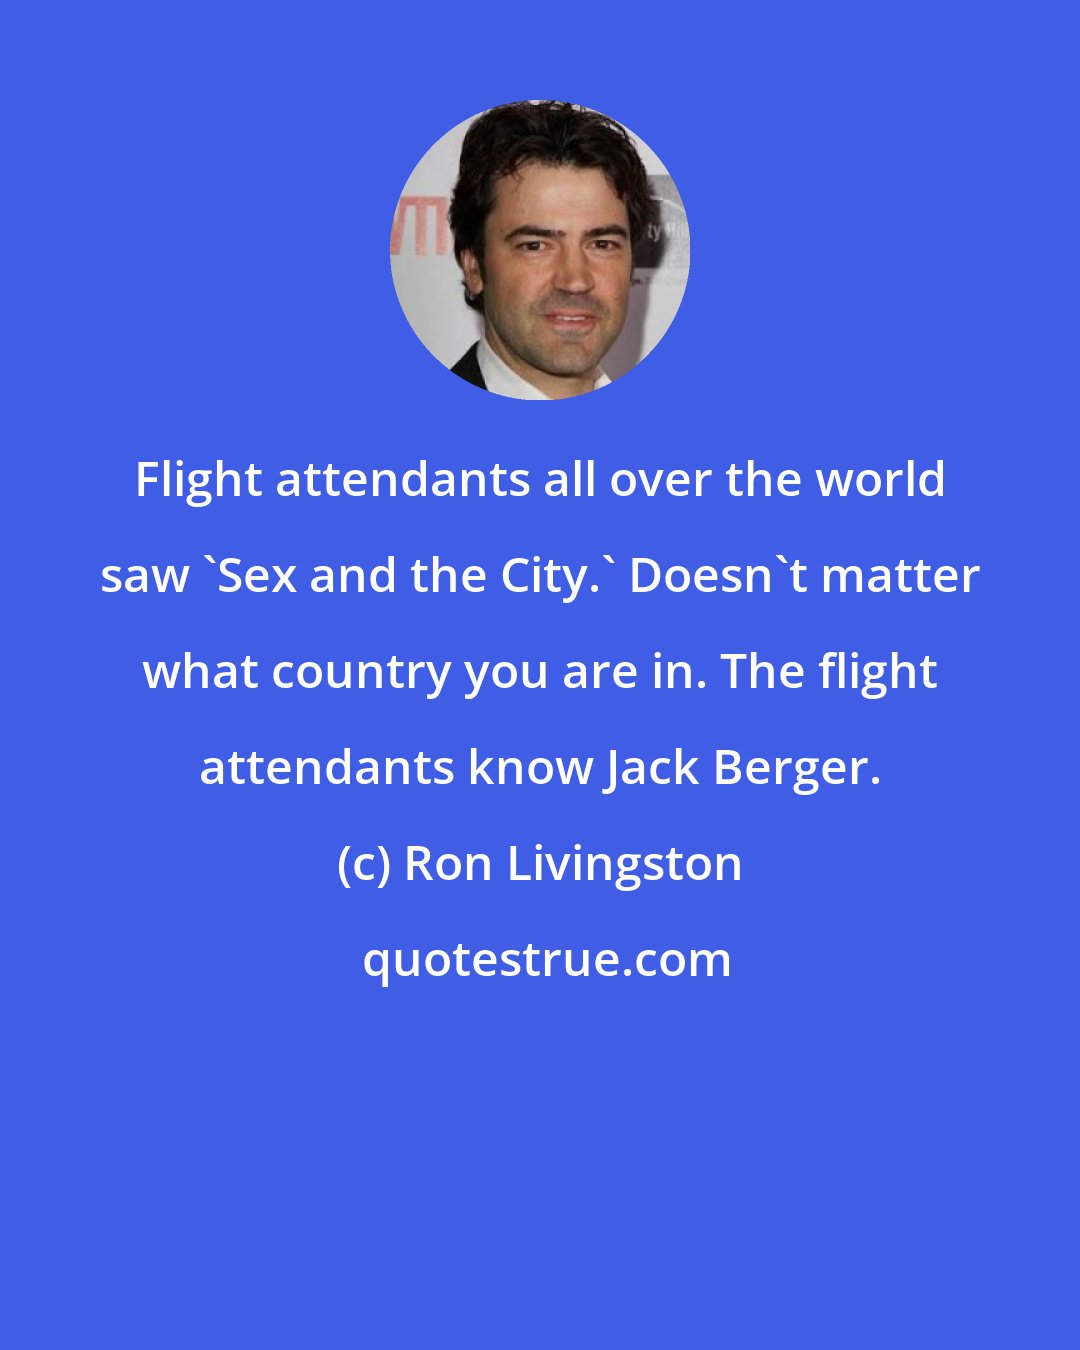 Ron Livingston: Flight attendants all over the world saw 'Sex and the City.' Doesn't matter what country you are in. The flight attendants know Jack Berger.